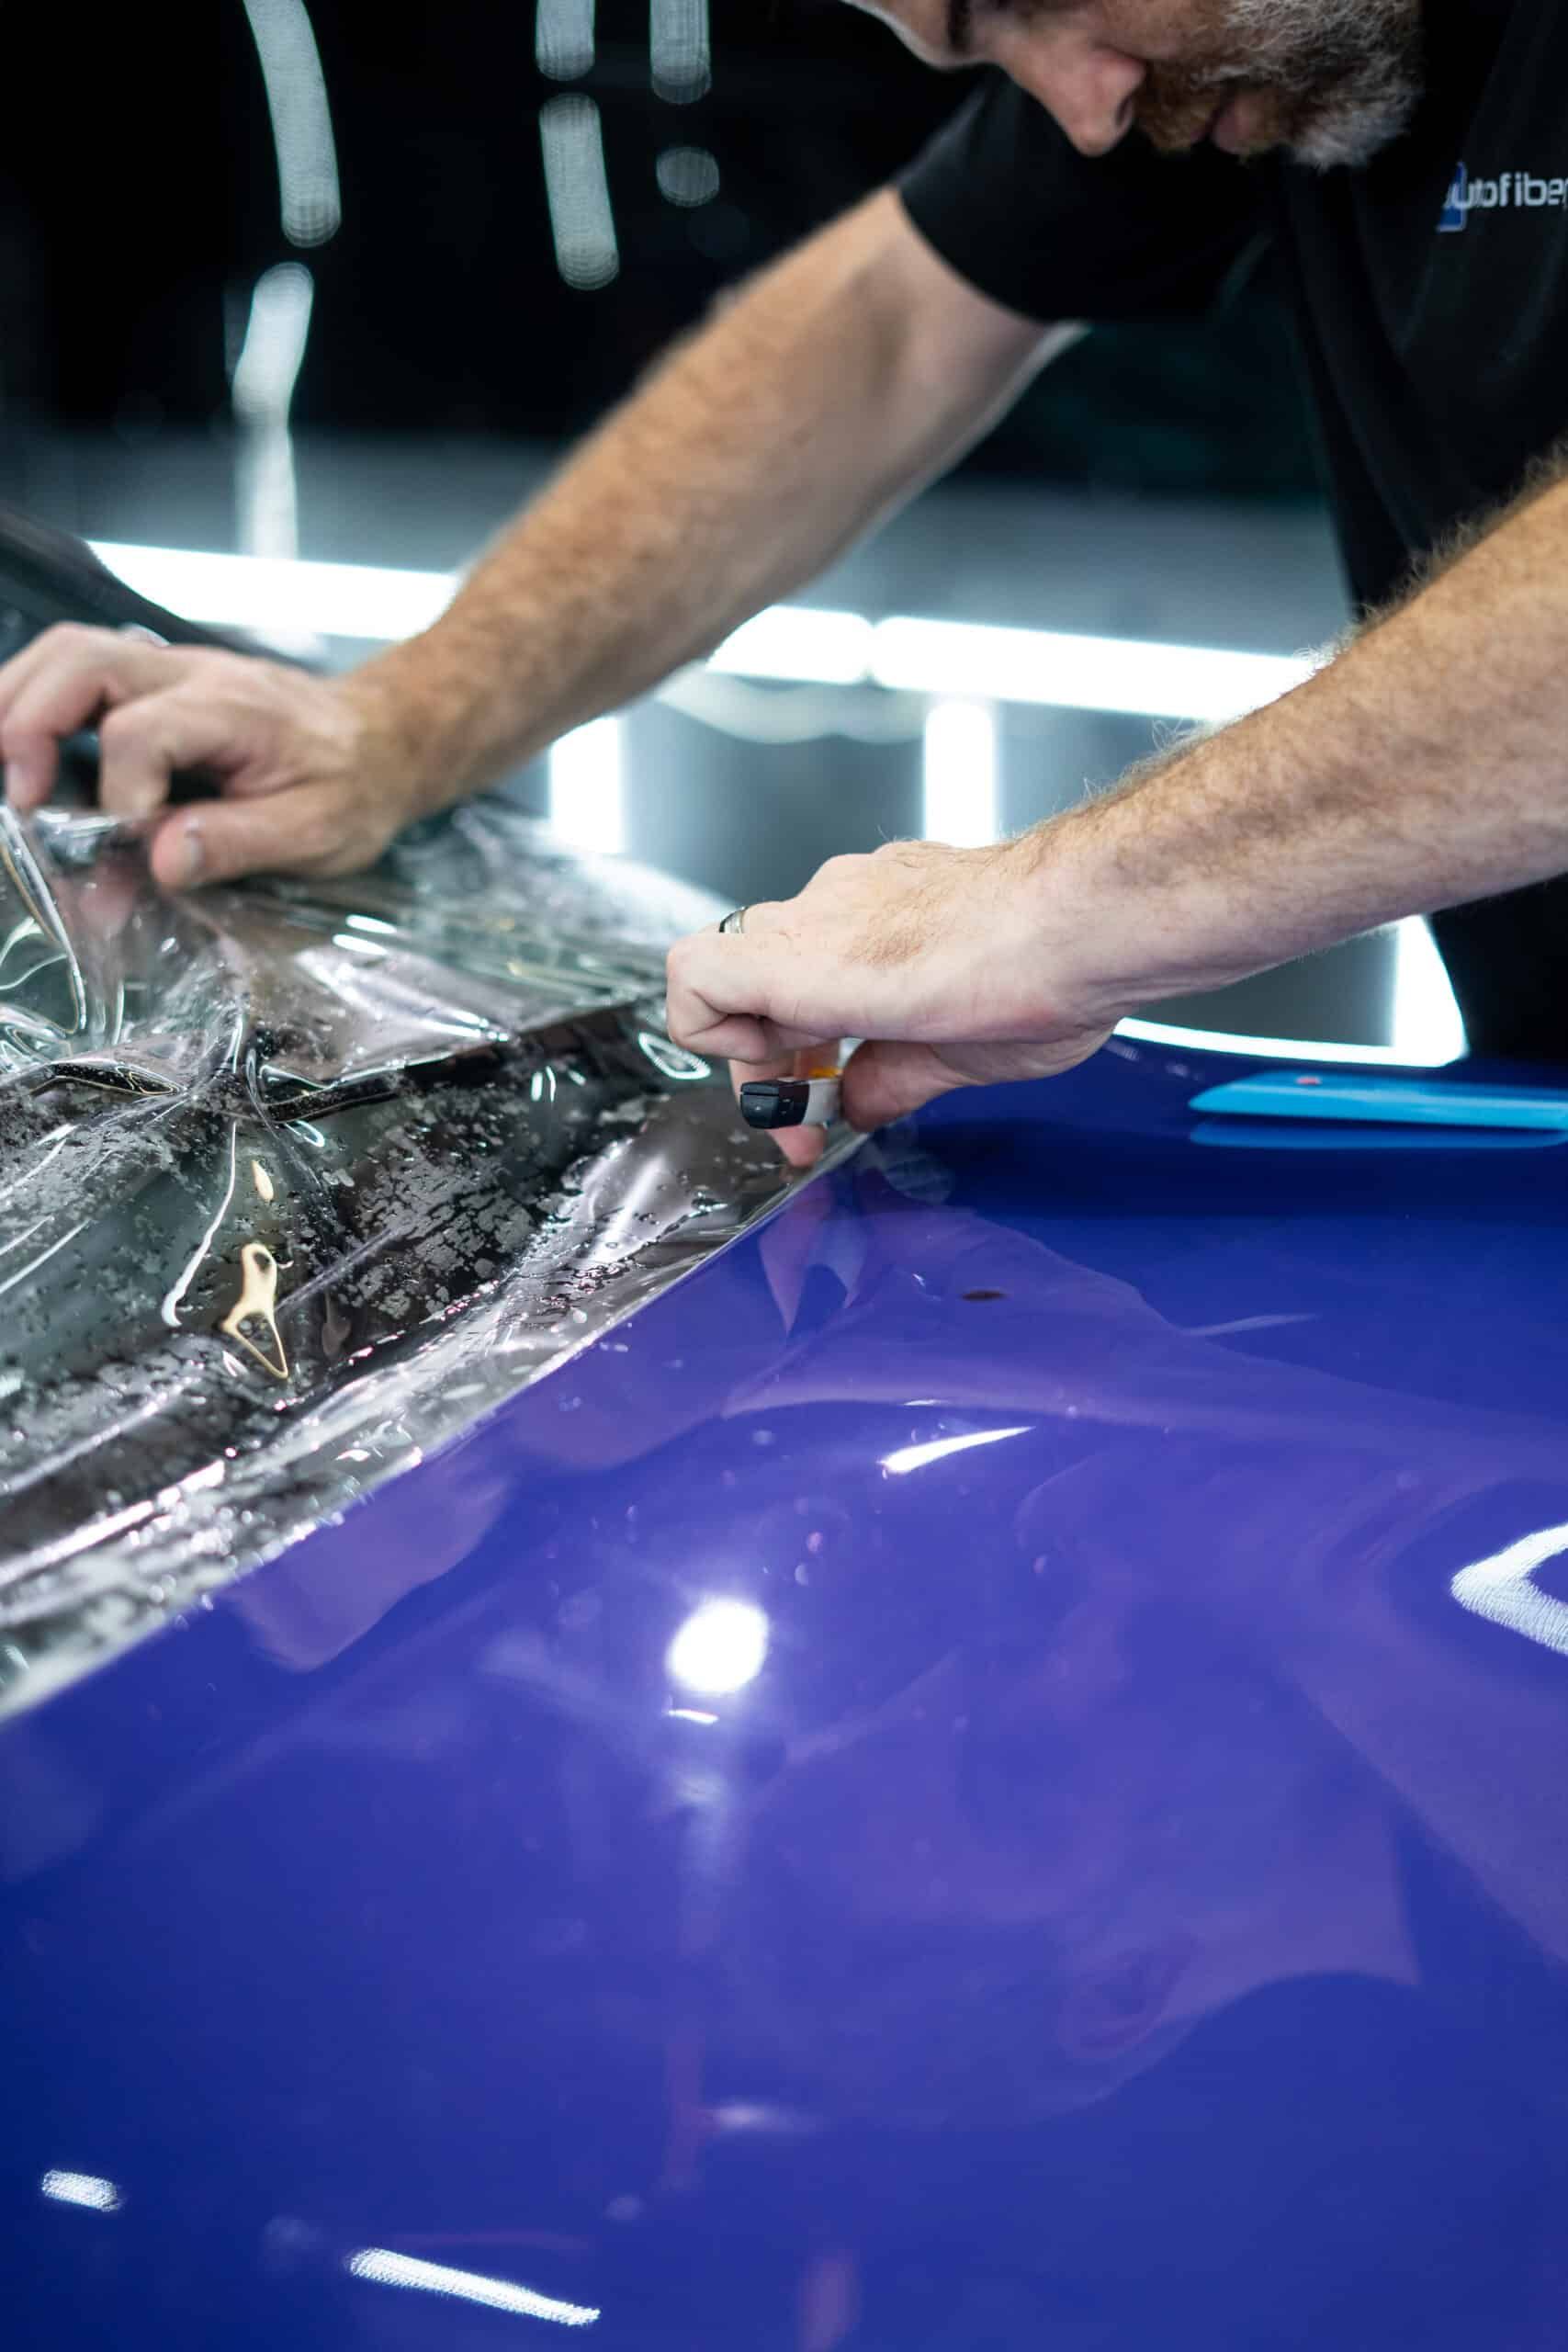 A man is wrapping the hood of a blue car with plastic wrap.